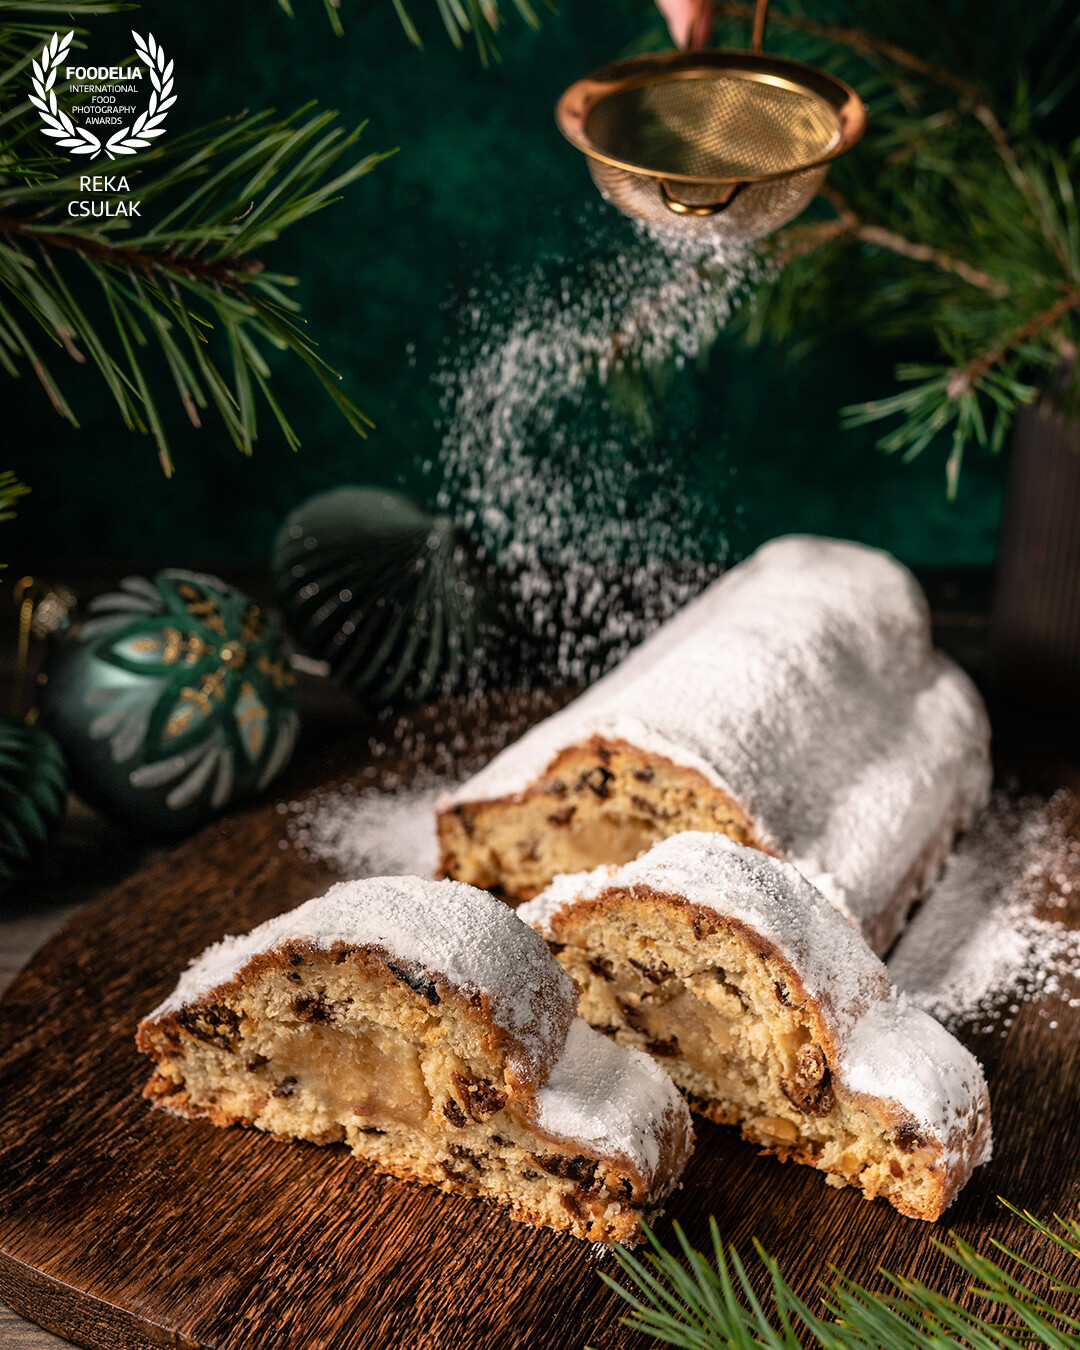 I love combining deep greens with festive gold on images that must radiate the holiday vibes - and I think I nailed it with a frozen action above this delicious Christmas bake called stollen.